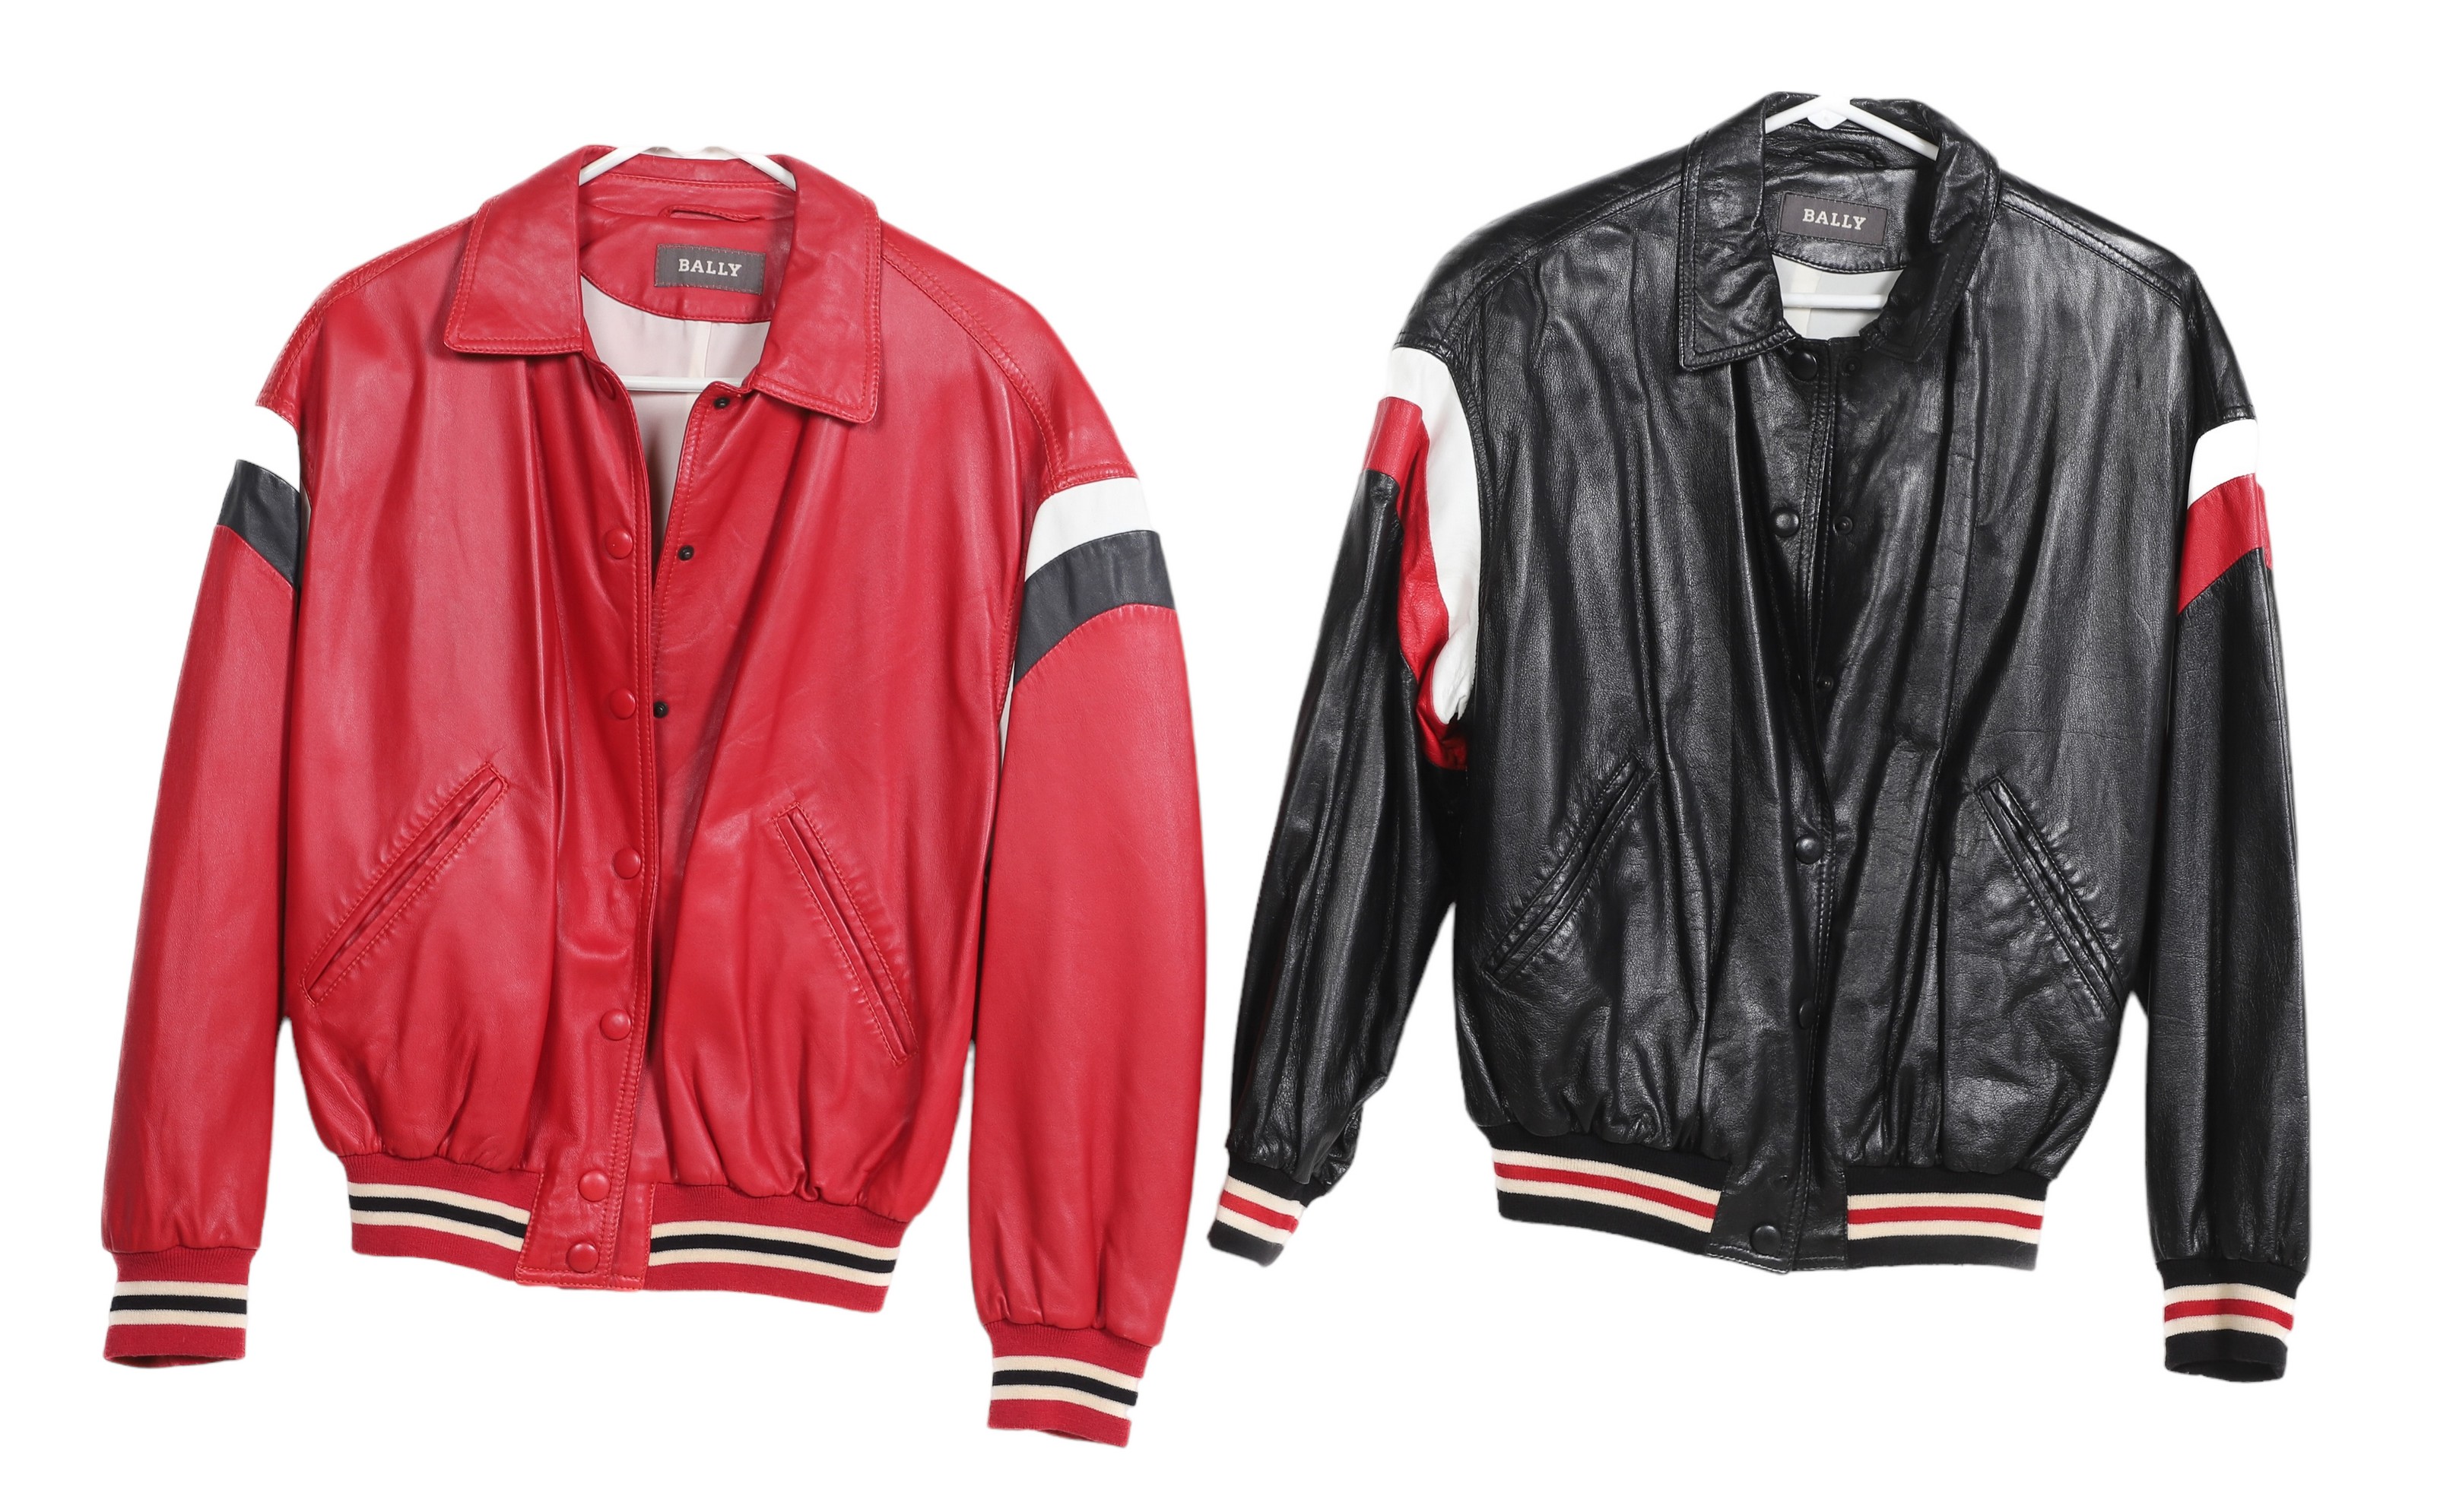 (2) Bally Leather Jackets, made